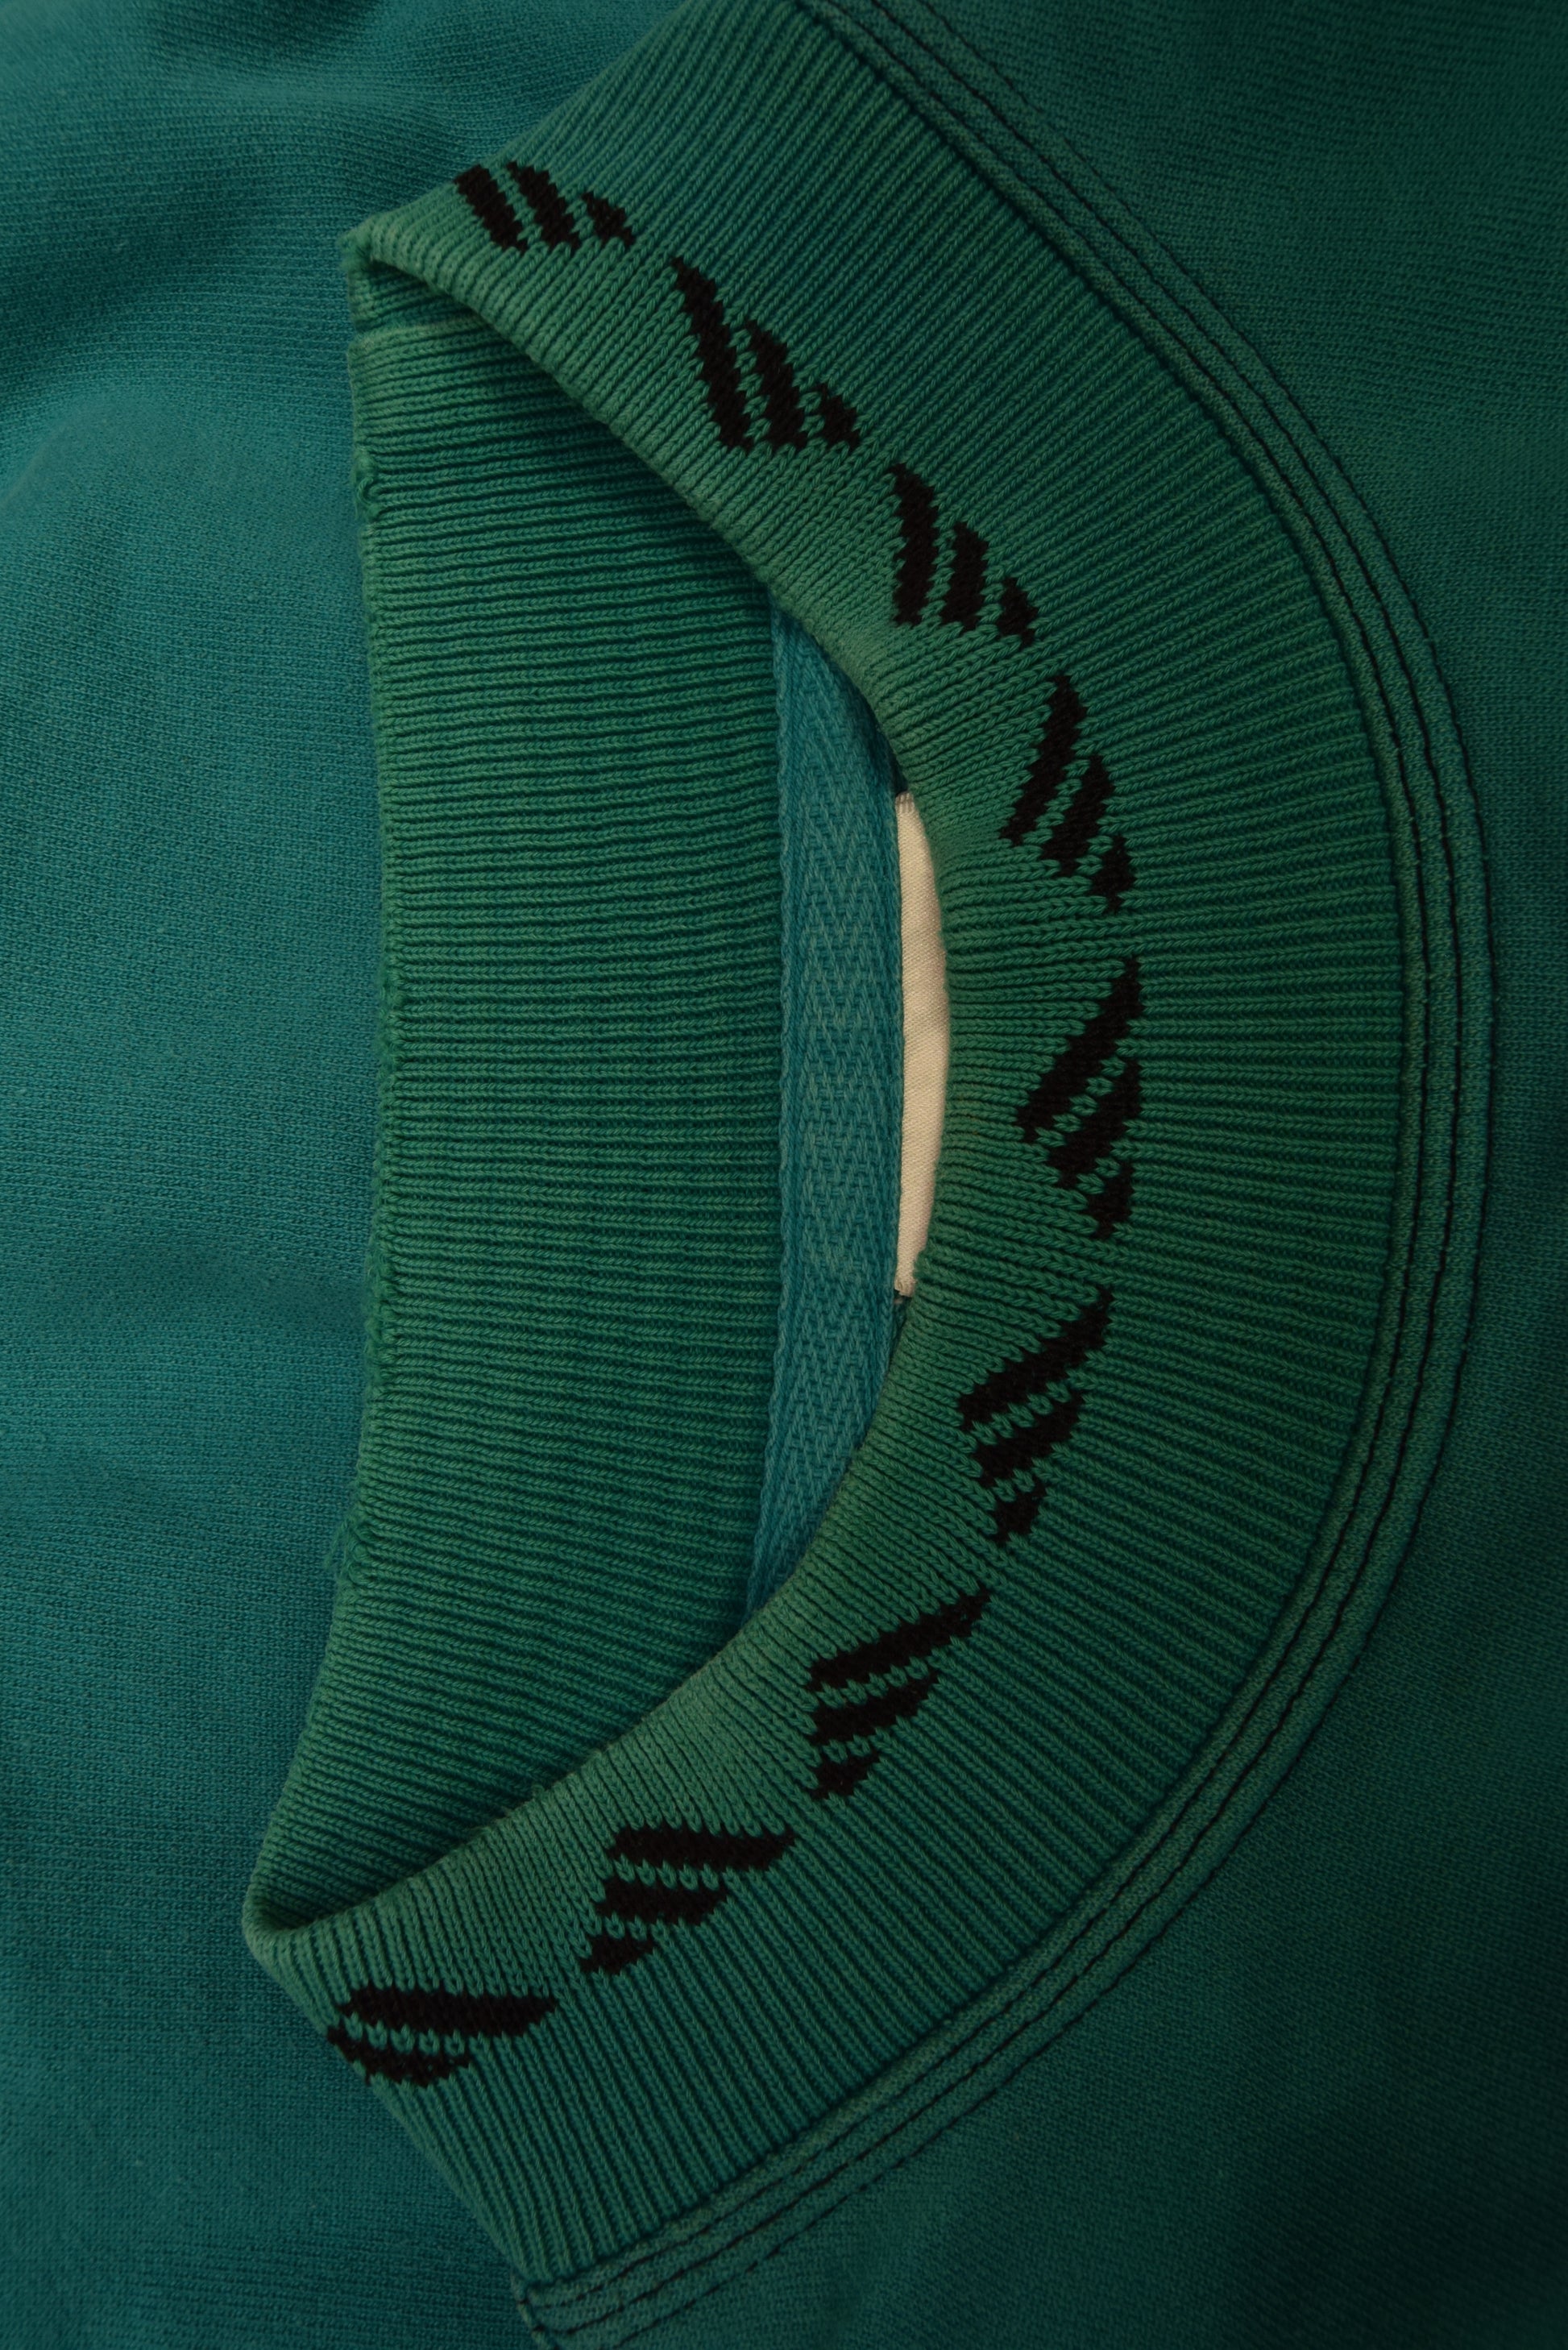 Vintage 90's Adidas Equipment EQT Sweatshirt / Crew Neck Green Boxy M L Made in Hong Kong Cotton Wide Collar